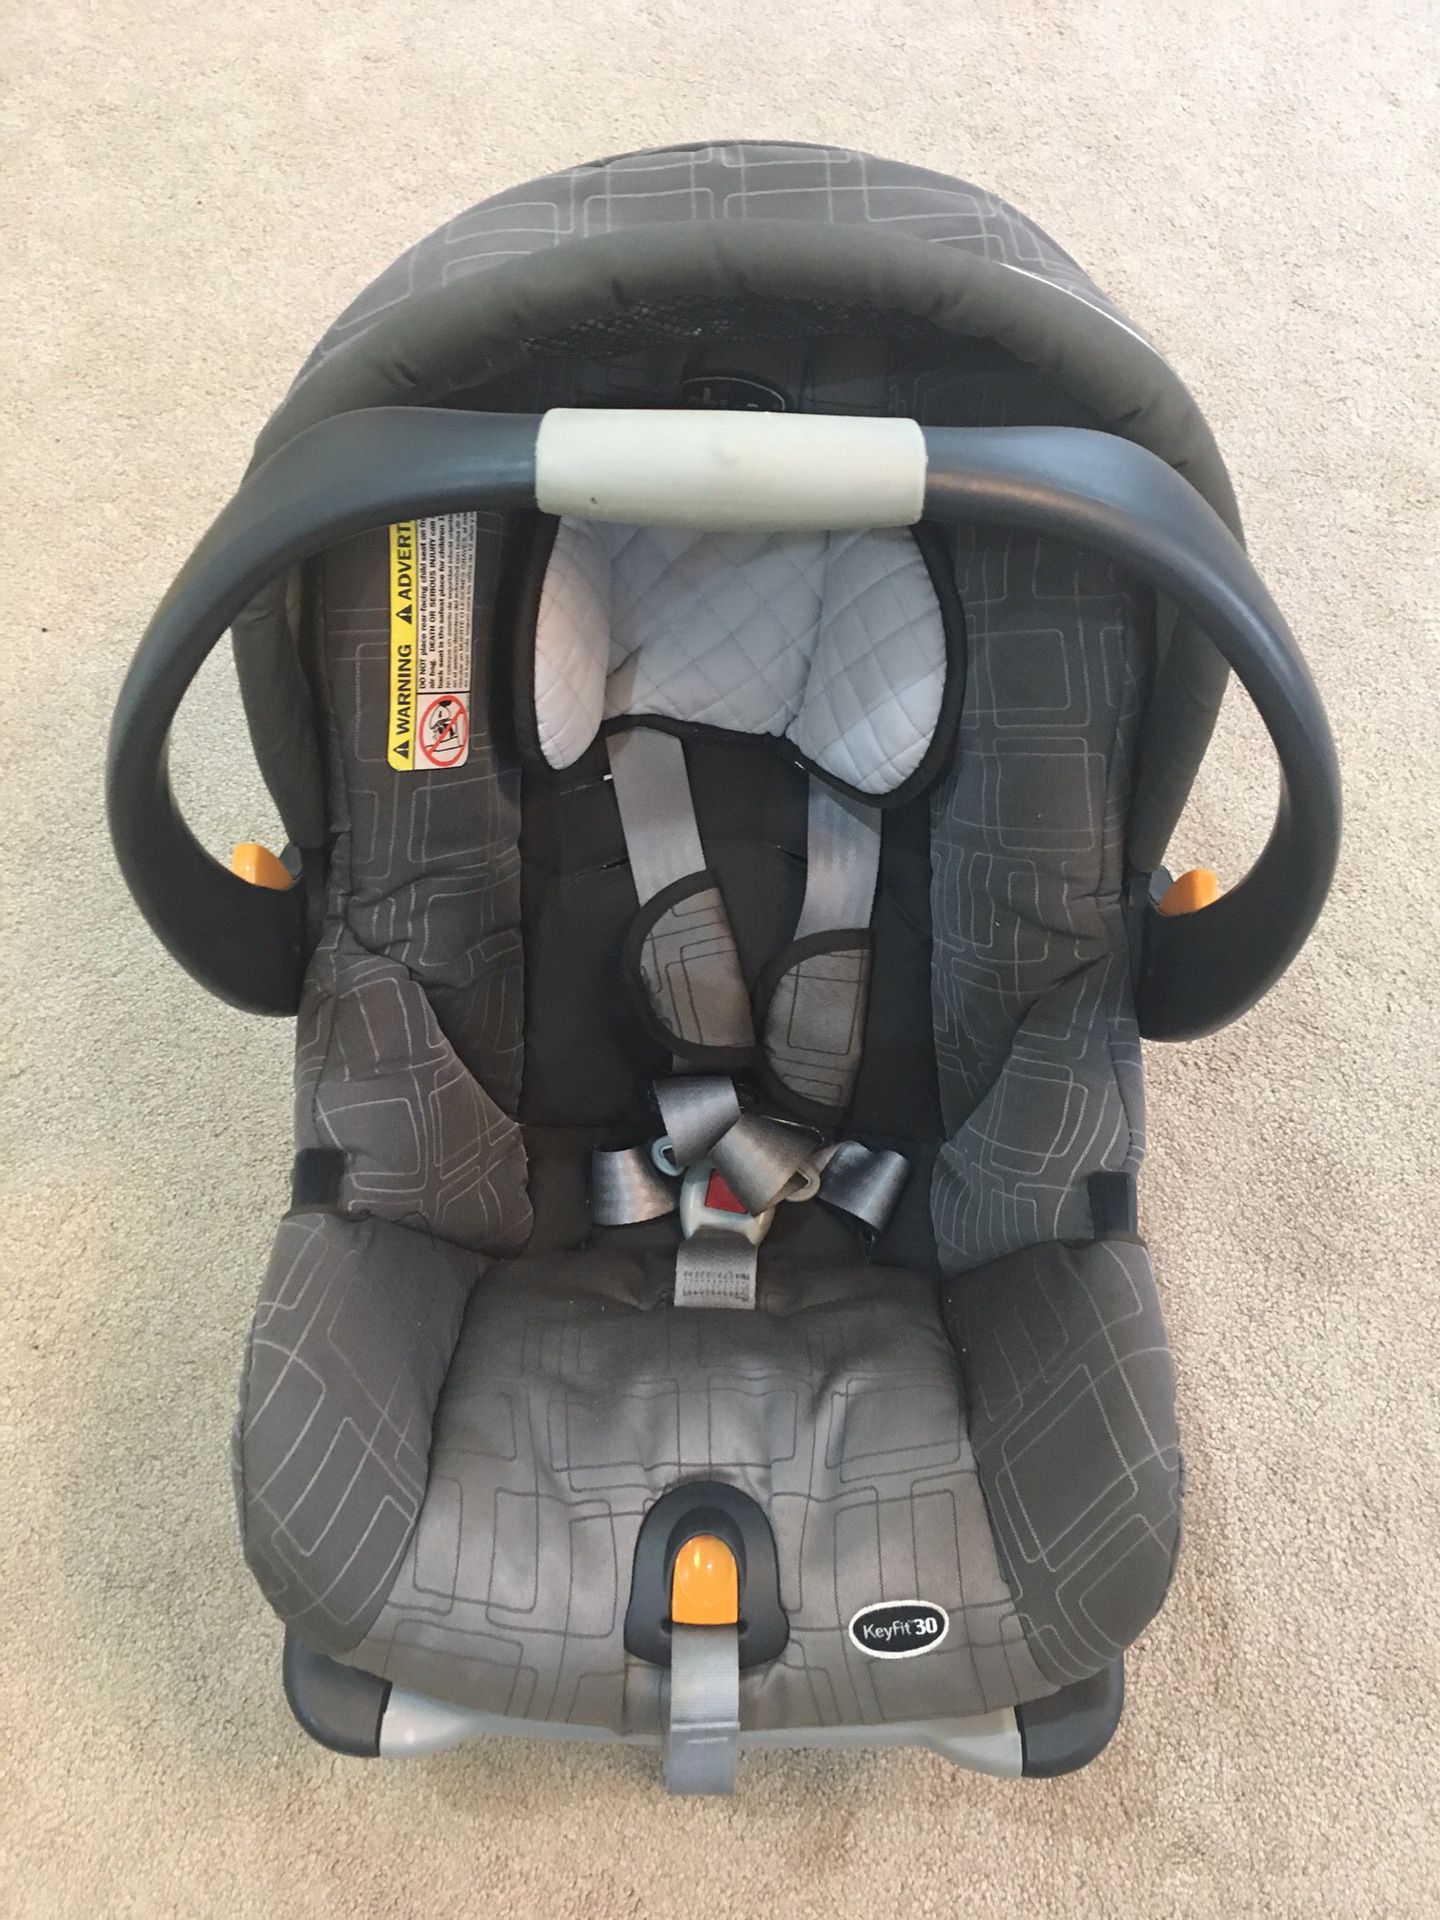 Chicco Key Fit 30 car seat for baby with base and adapter for stroller .